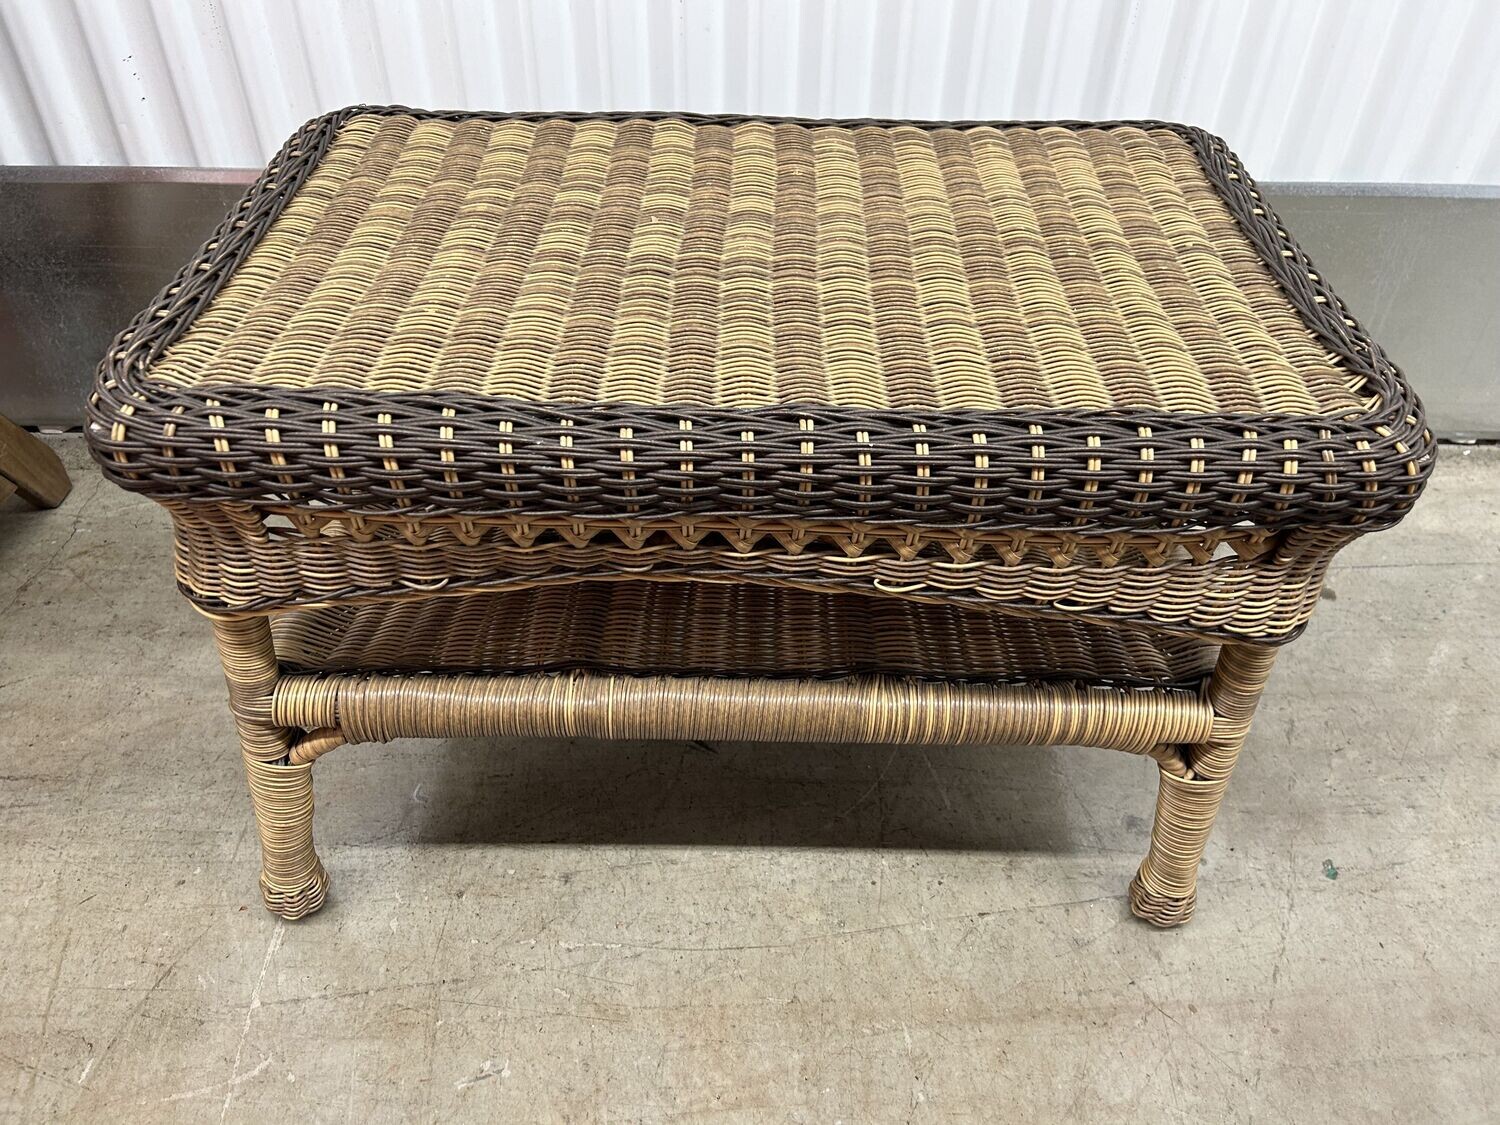 Wicker 2-tone Coffee Table, resin, great condition! #2103